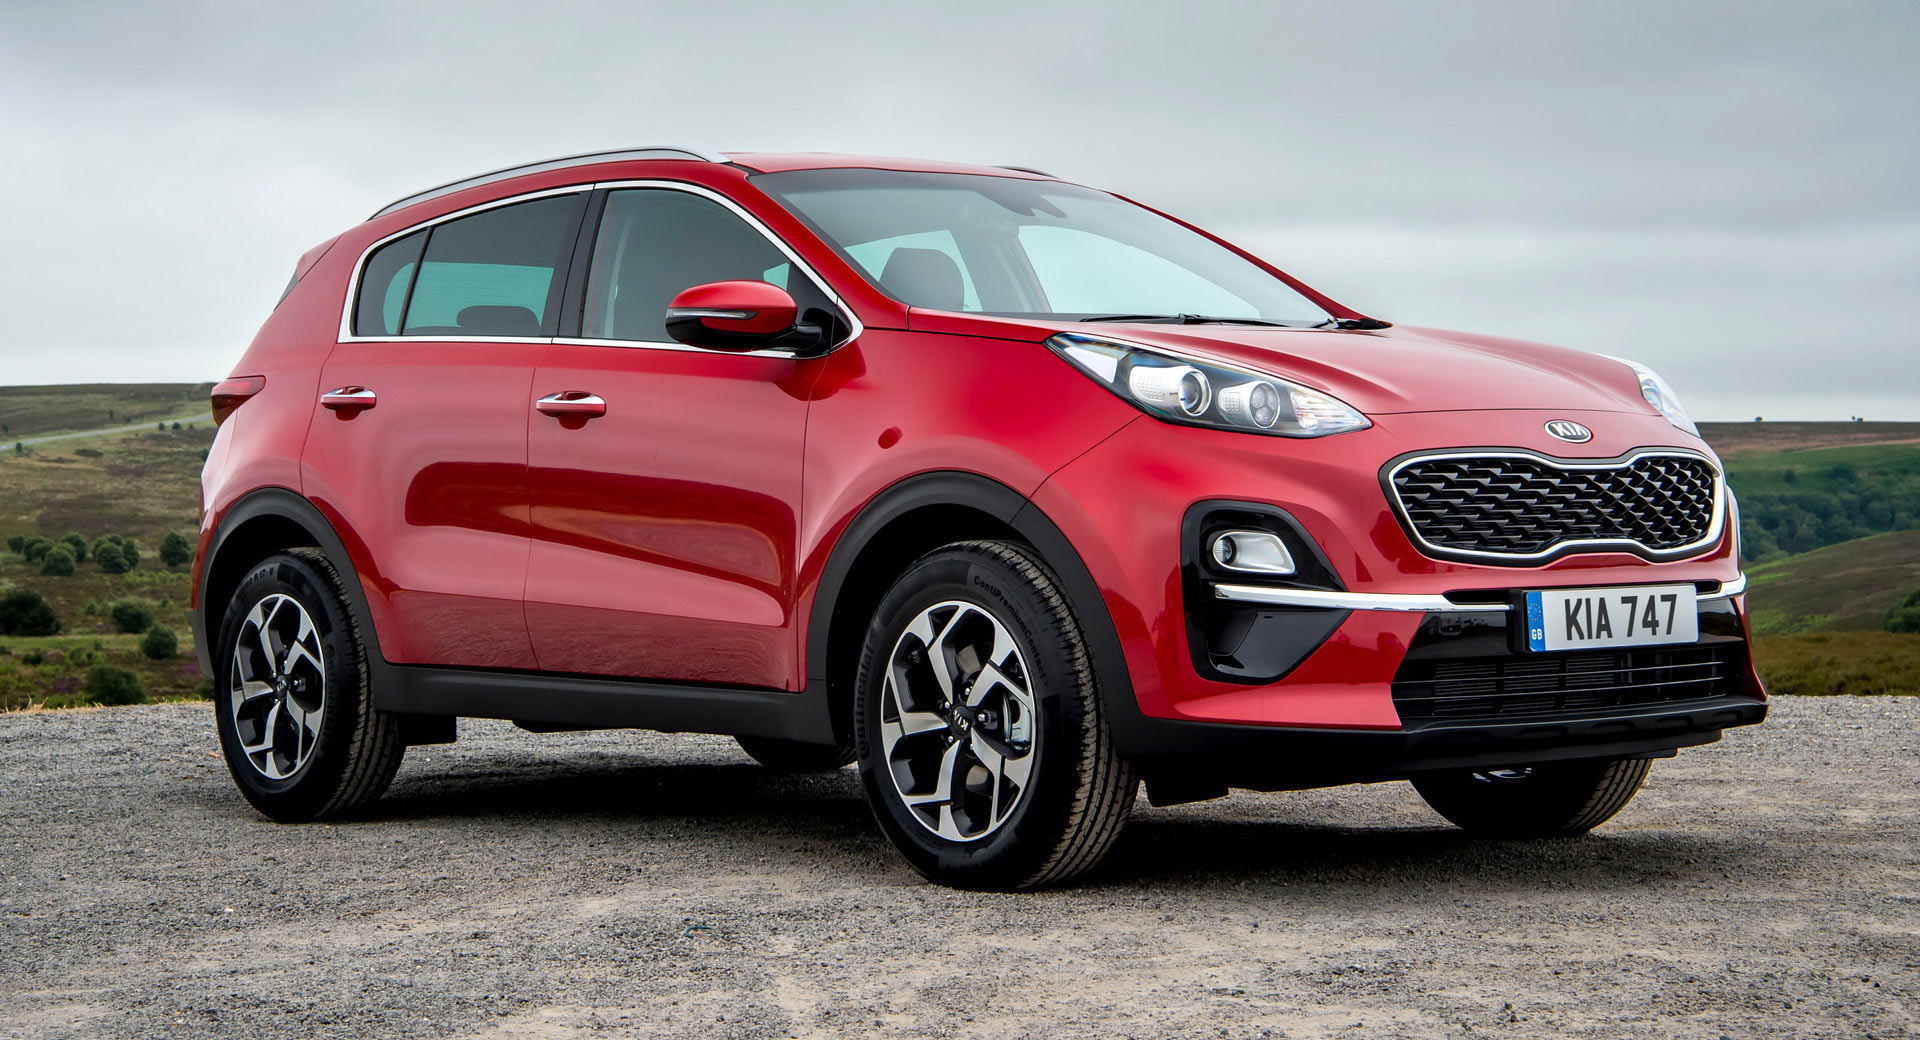 2019 Kia Sportage Launched In The UK, Gains New Special